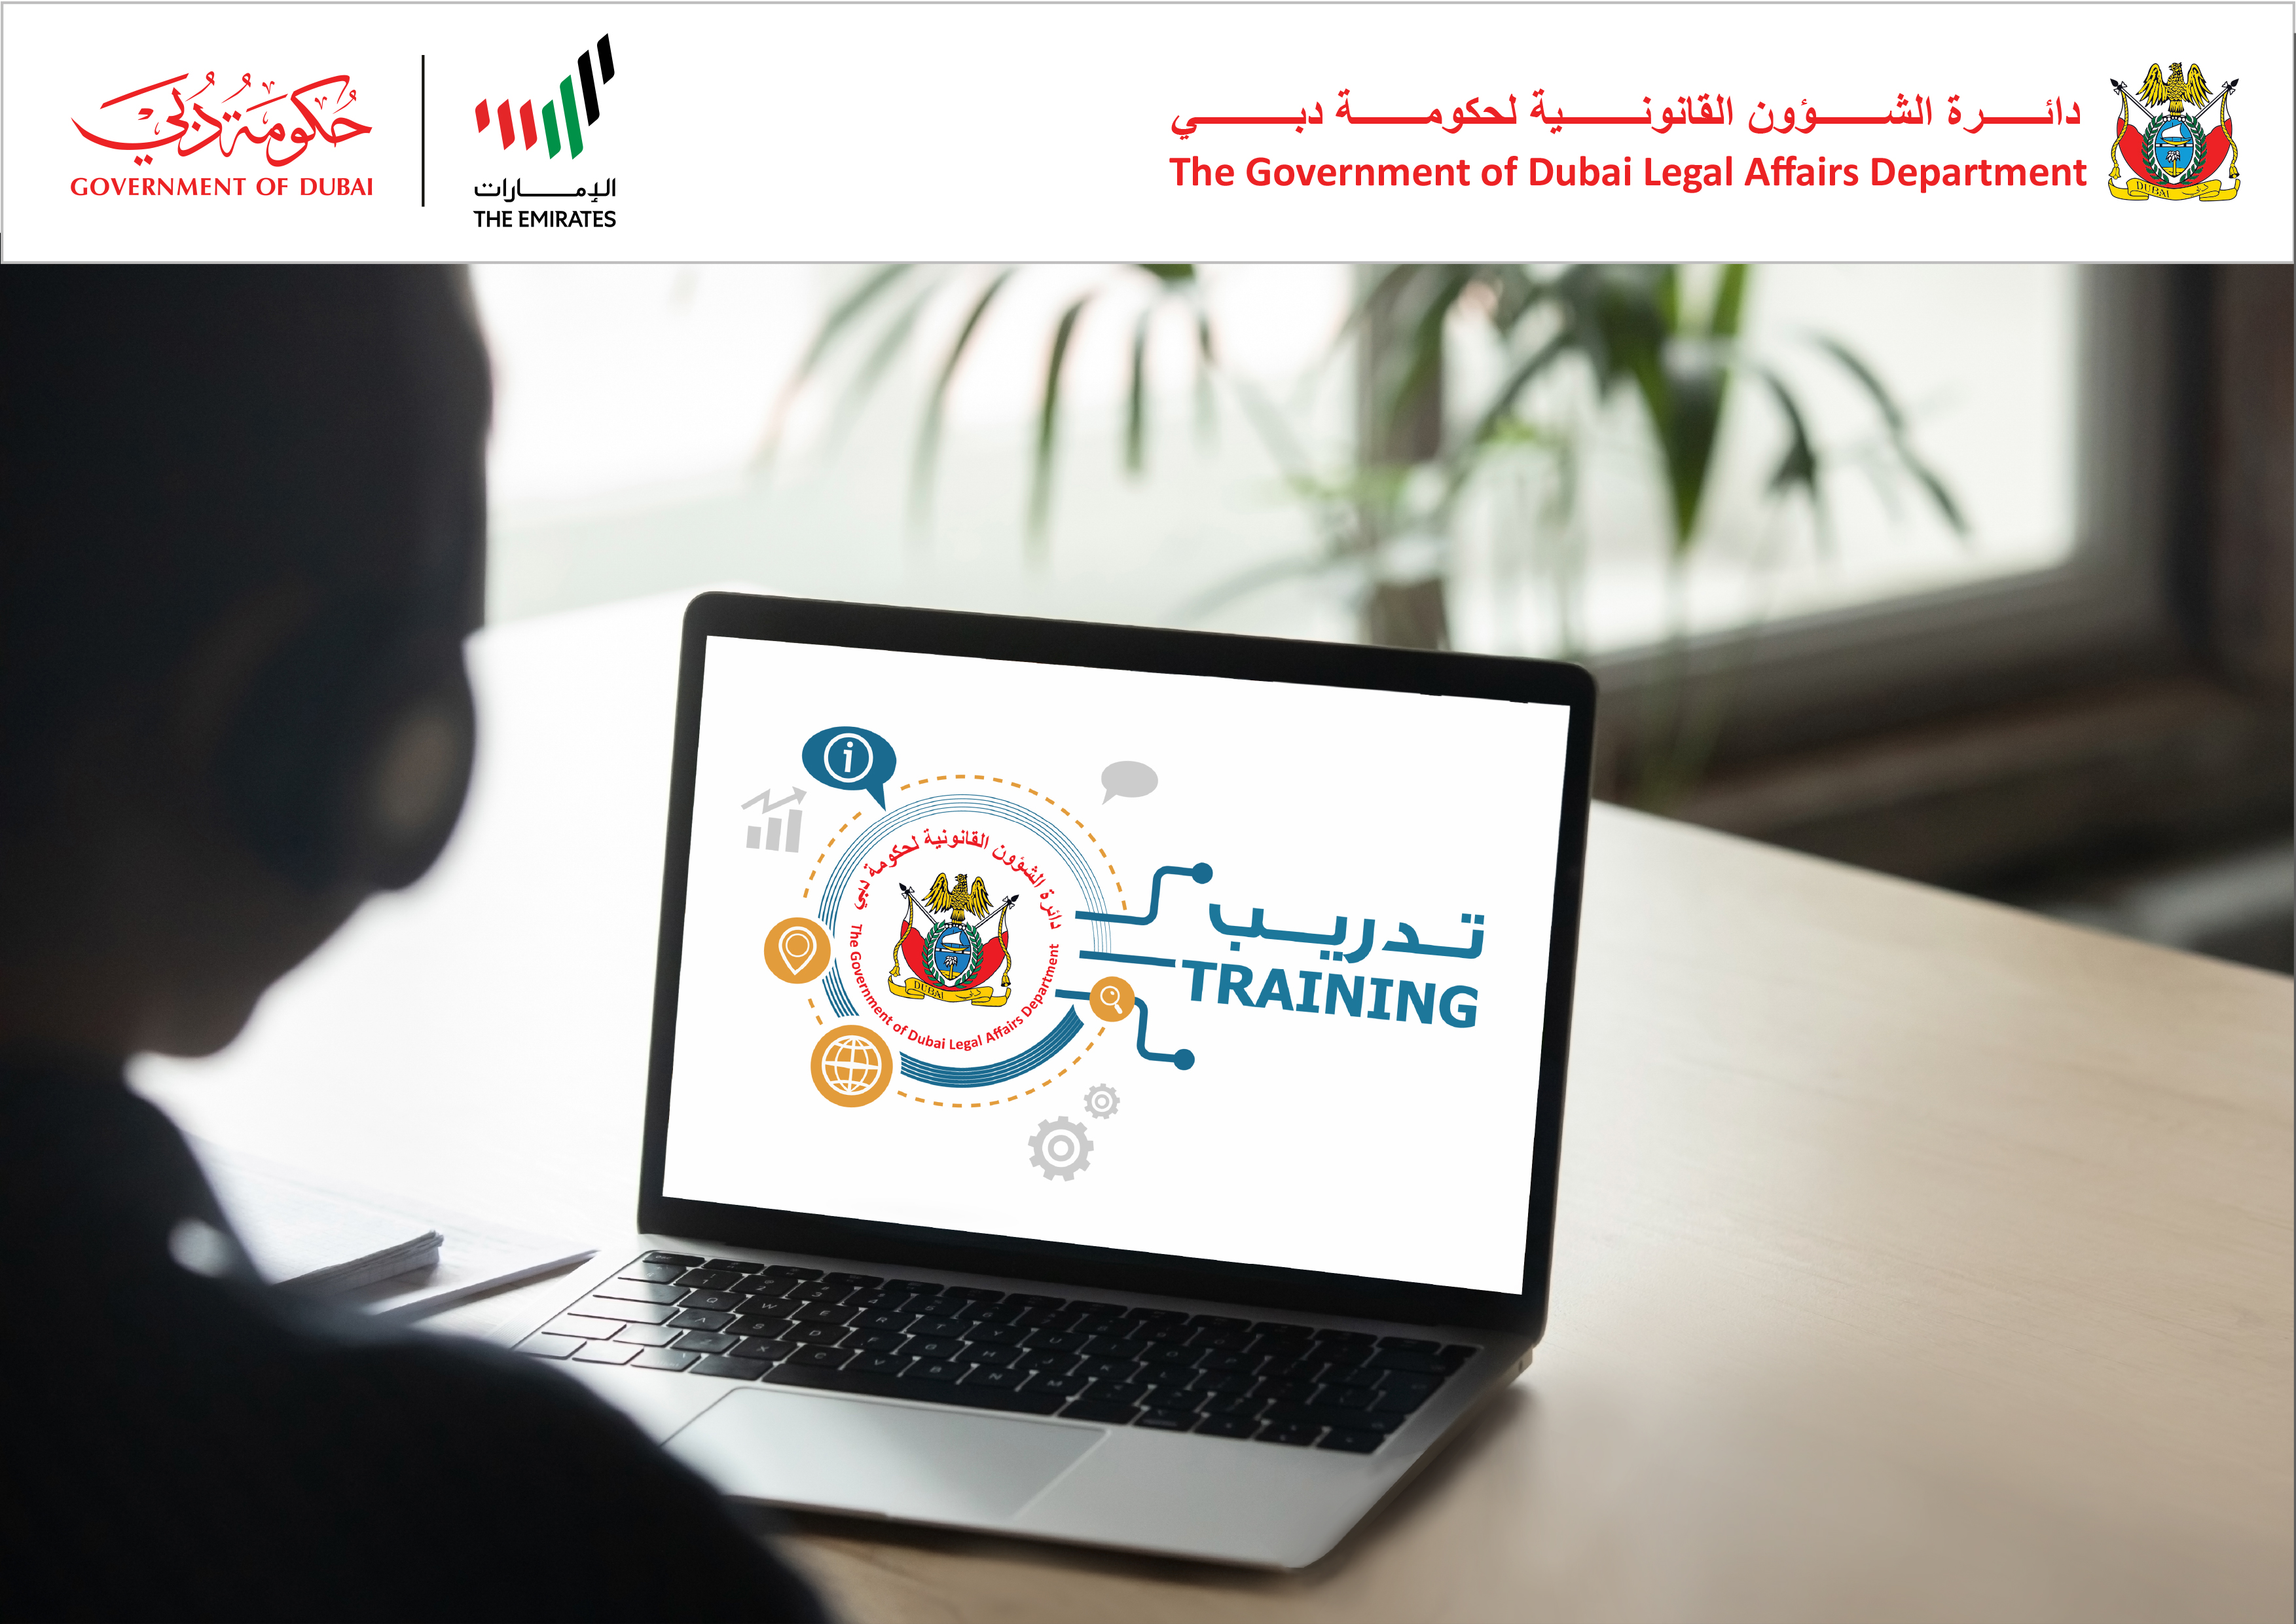 The Government of Dubai Legal Affairs Department Organises Remote Training Courses for Its Employees